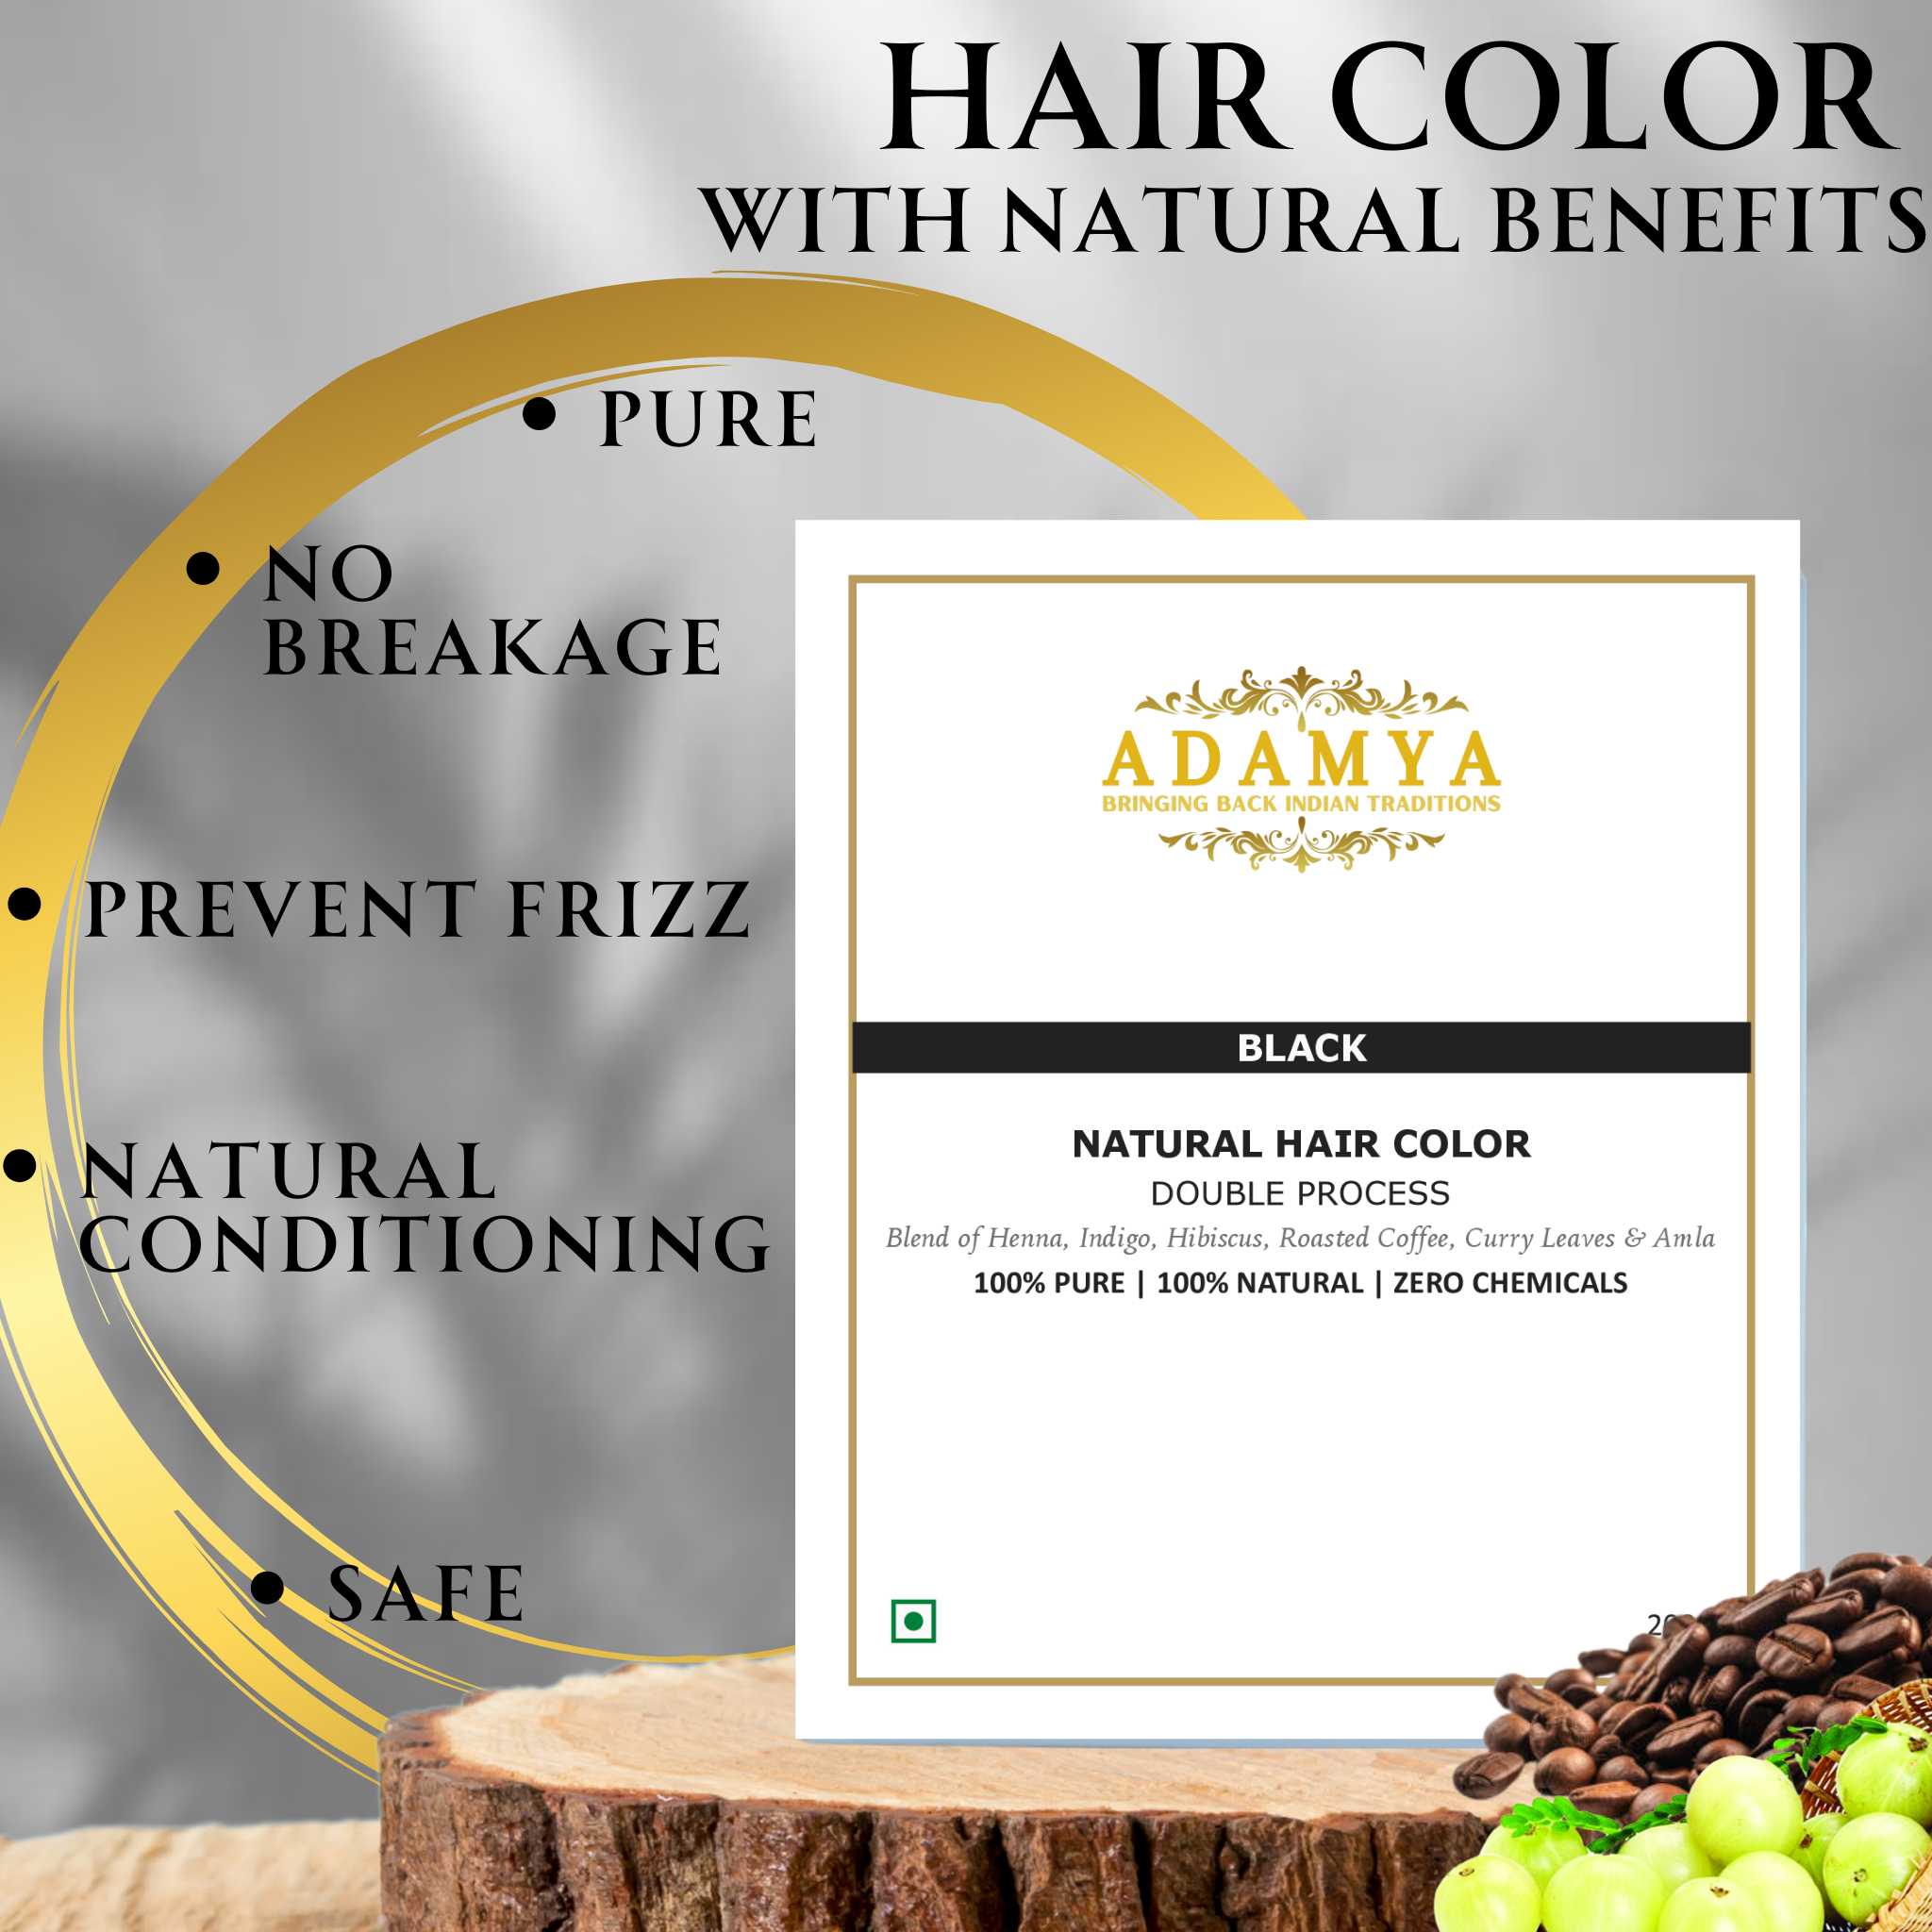 HANDMADE NATURAL HAIR COLOR (DOUBLE PROCESS) _ 100% PURE, 100% NATURAL AND CHEMICAL FREE